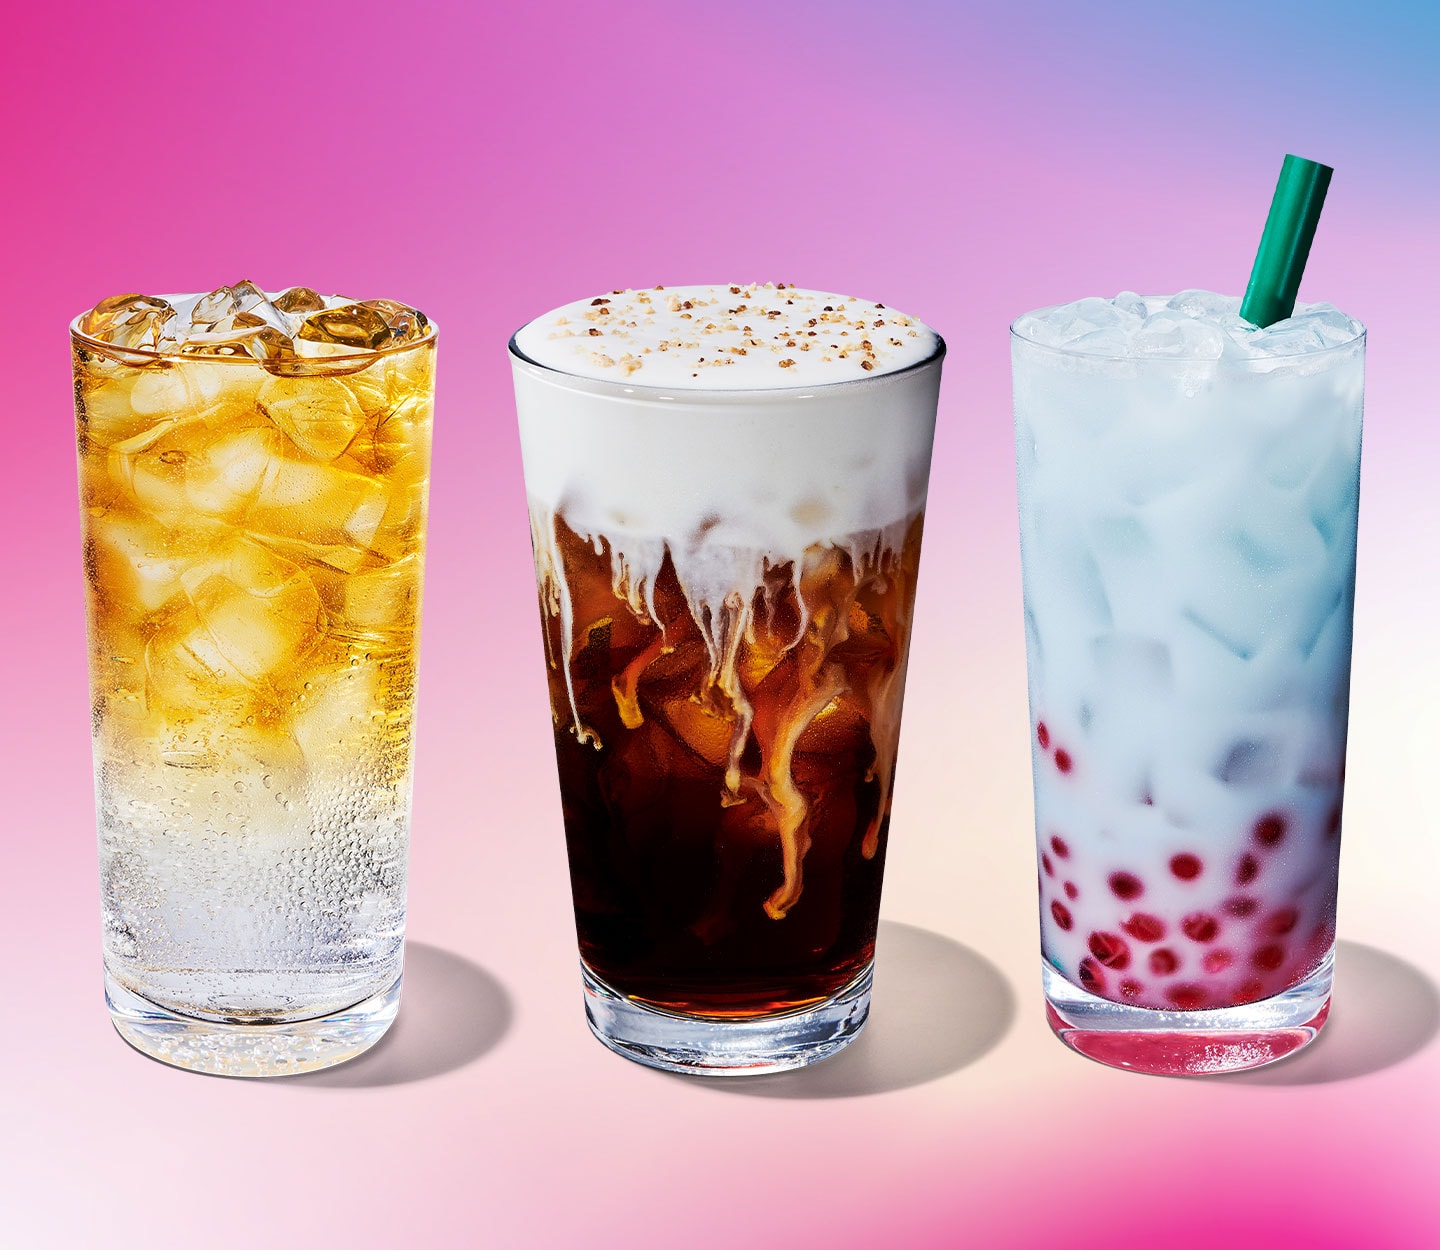 A carbonated iced drink with tea on top, an iced coffee with a creamy foam topping, and a light blue creamy iced drink with pink pearls.